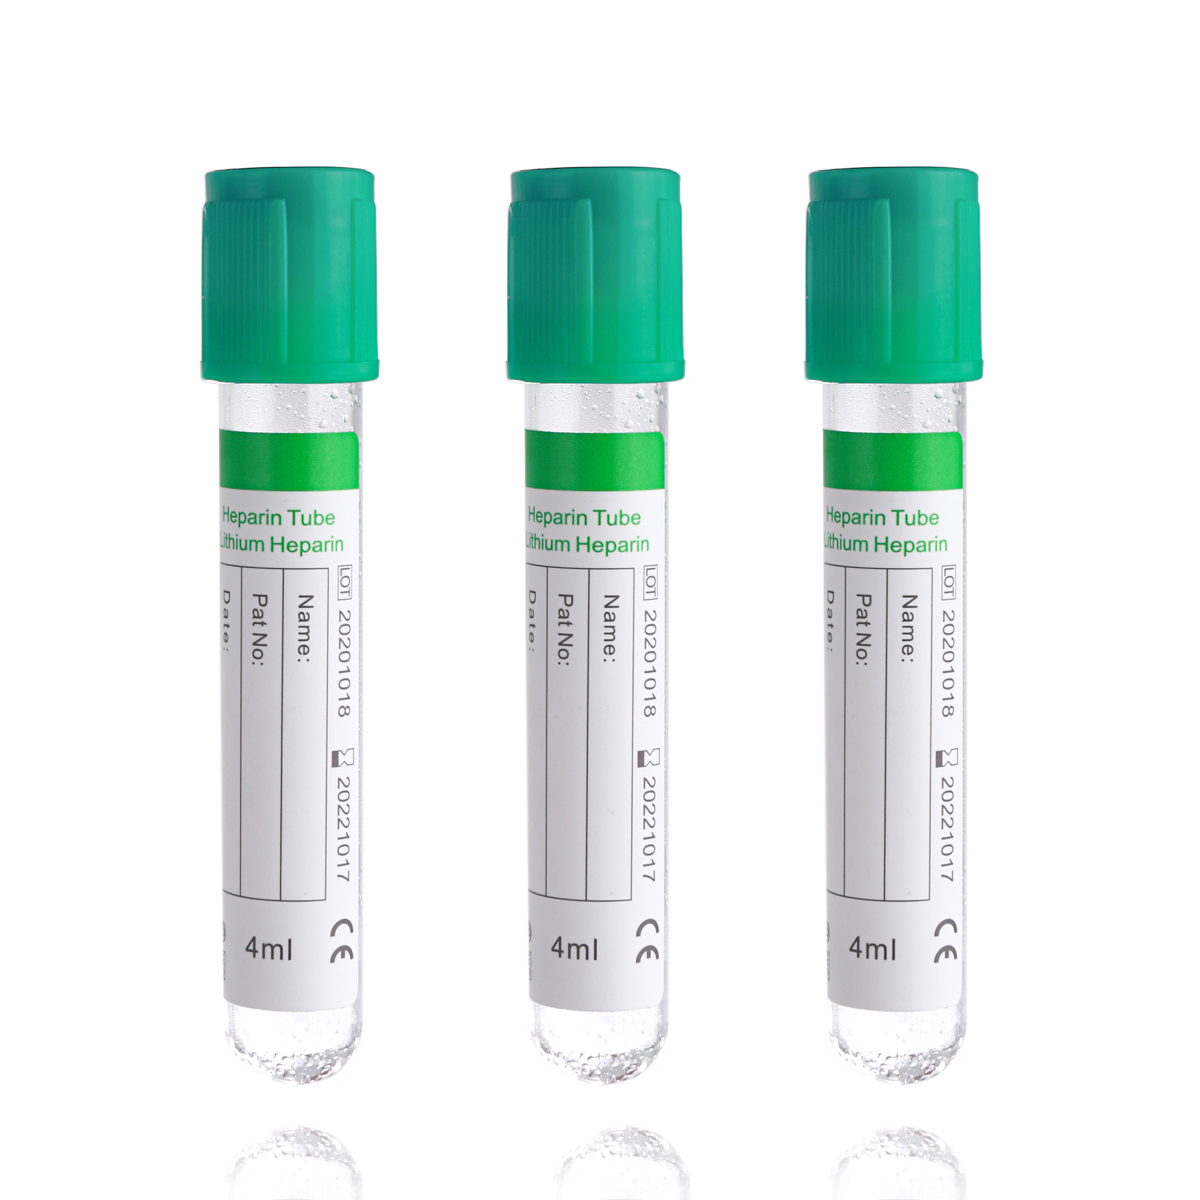 Plastic and Glass Green Top Heparin Vacuum Blood Collection Tube Featured Image